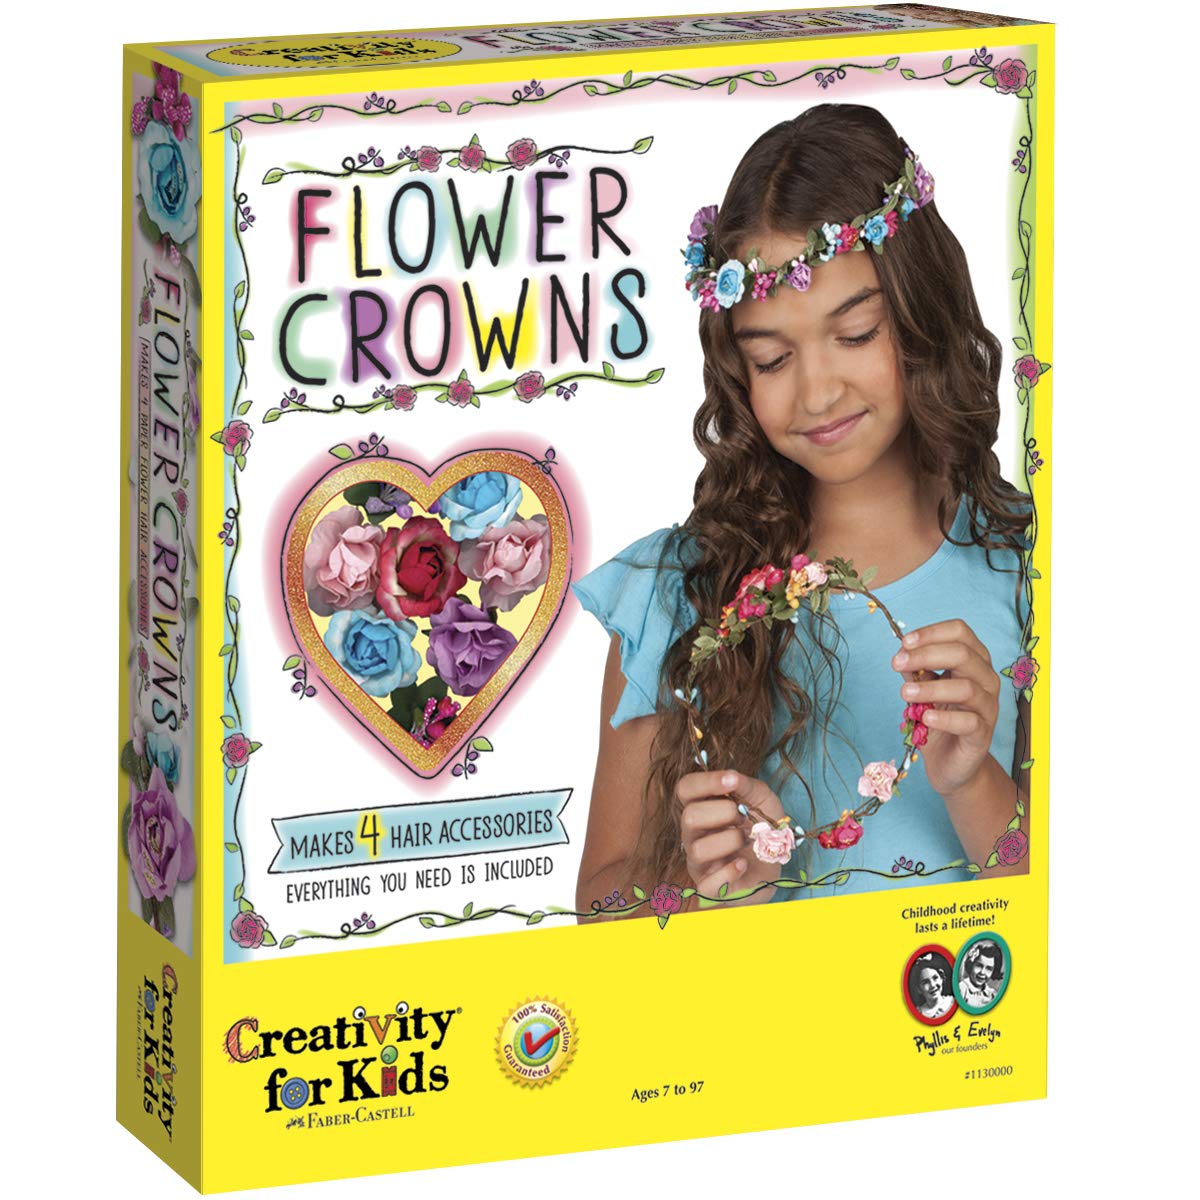 Book Cover Creativity for Kids Flower Crowns Craft Kit - Create 4 Hair Accessories Flower Crowns Kit